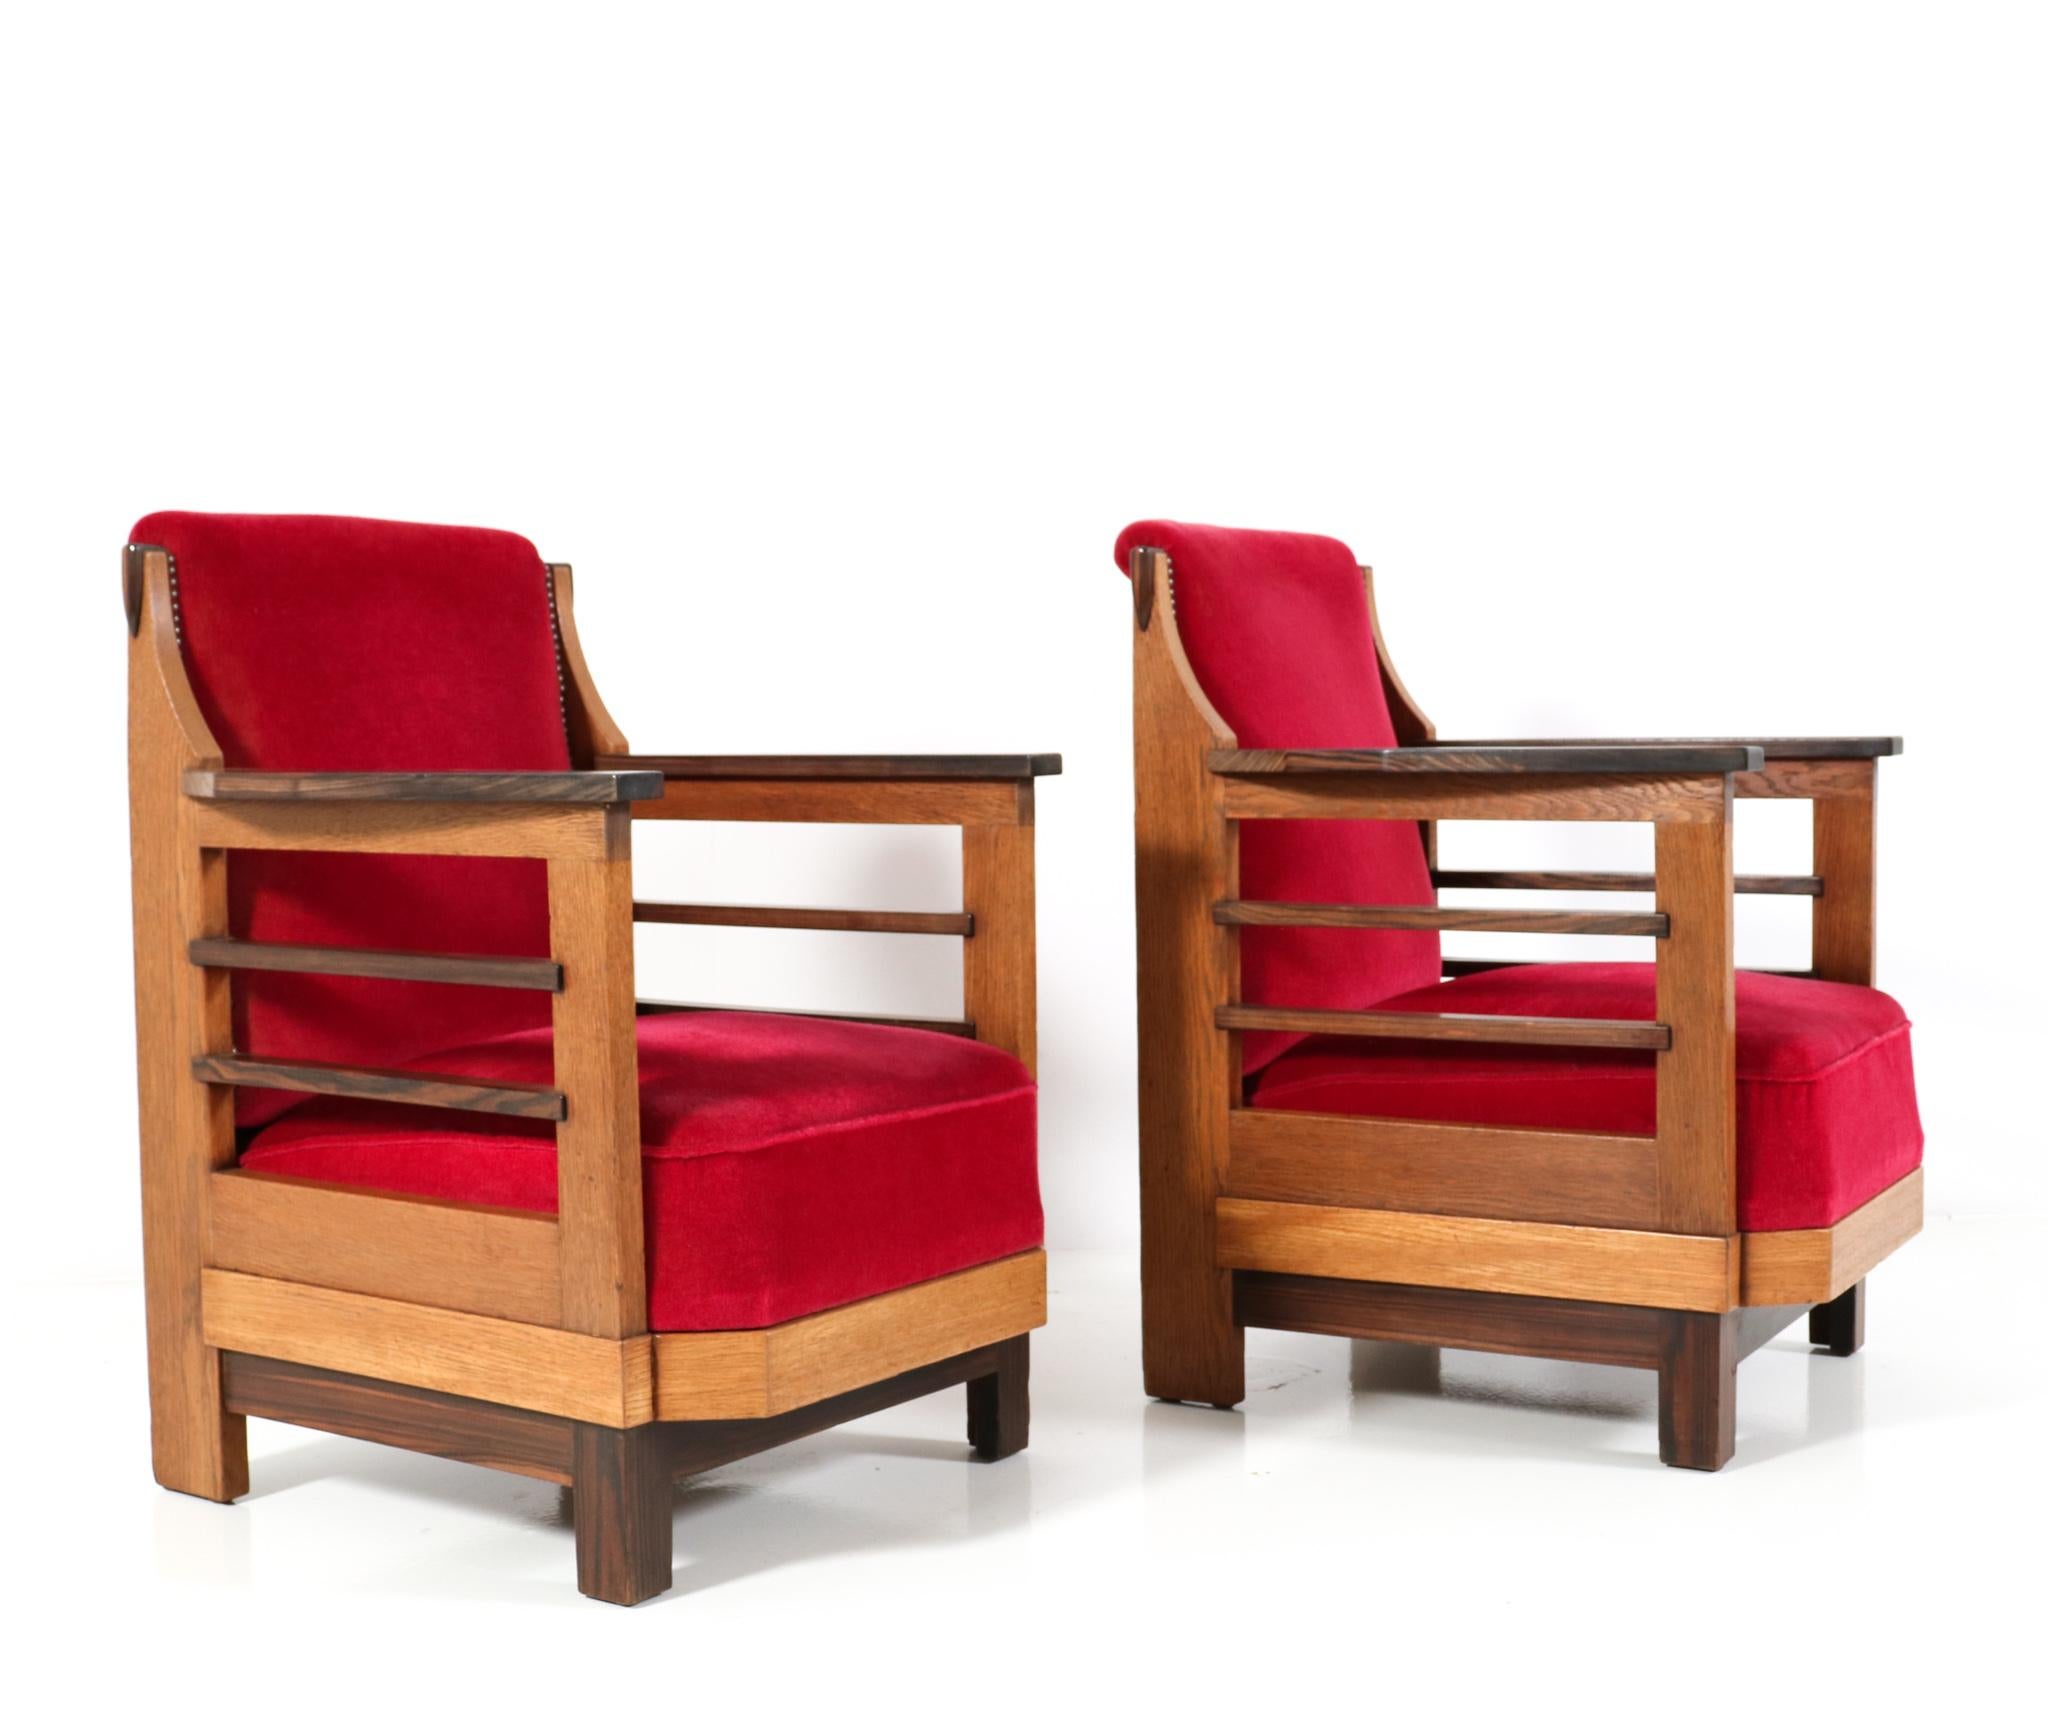 Fabric Pair of Art Deco Amsterdamse School Lounge Chairs by Anton Lucas Leiden, 1920s For Sale